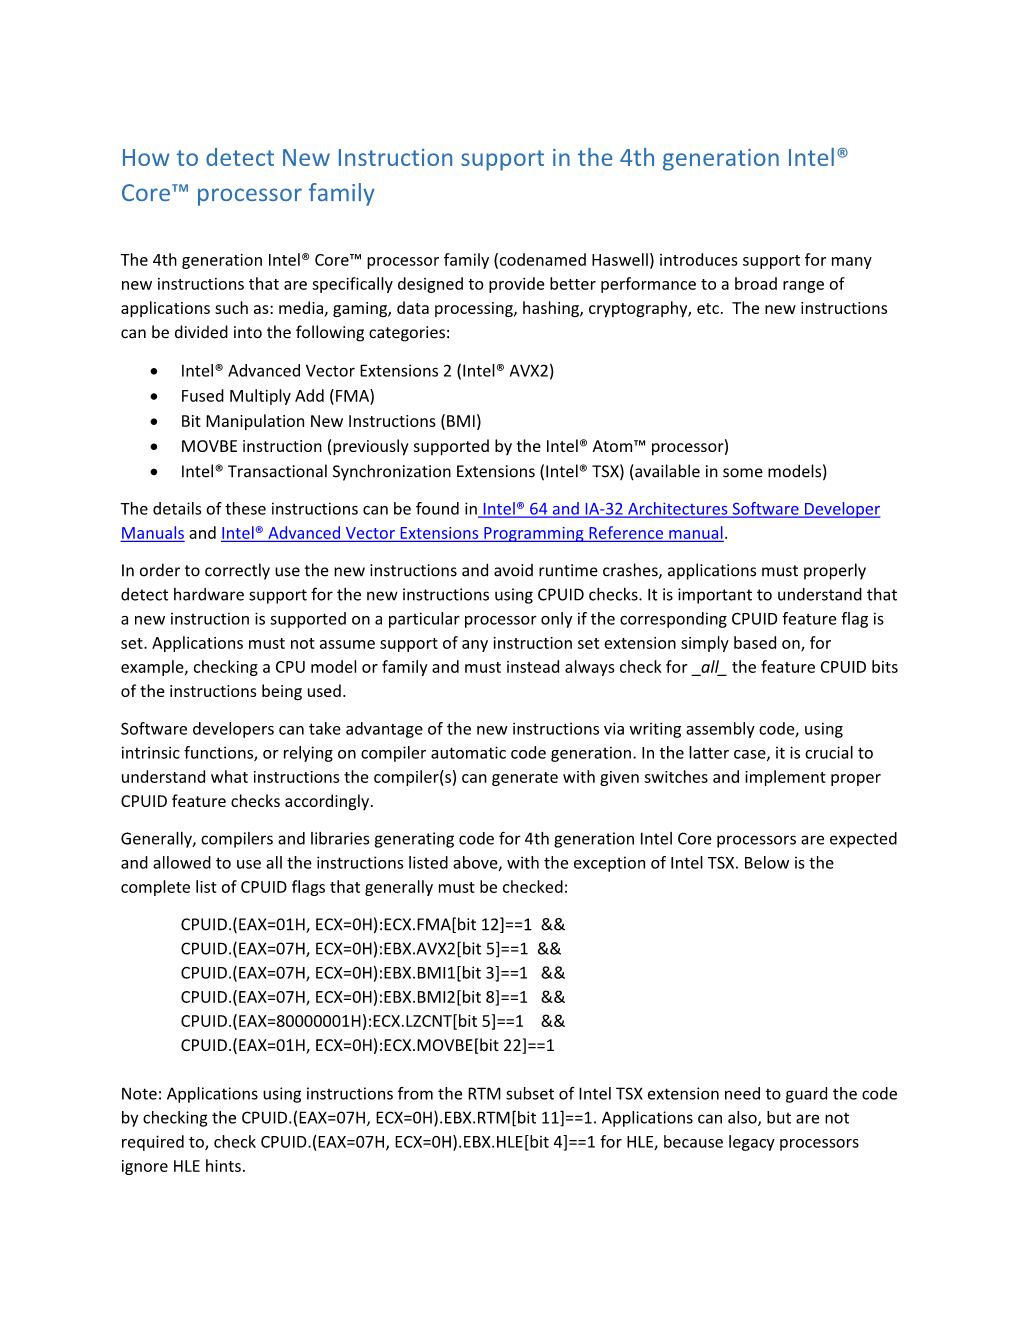 How to Detect New Instruction Support in the 4Th Generation Intel® Core™ Processor Family